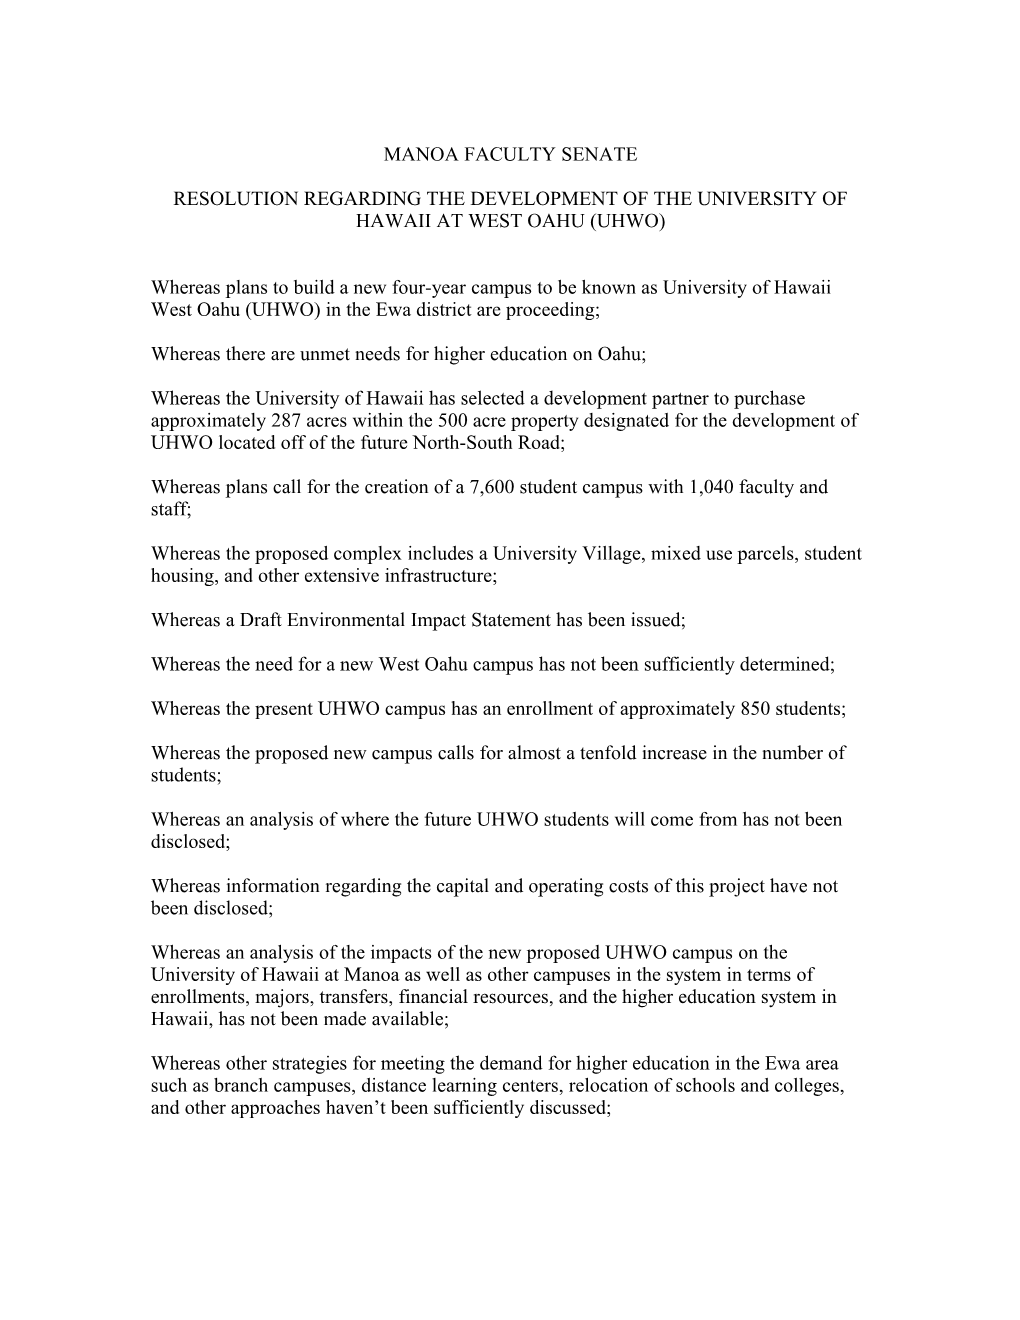 Resolution Regarding the Development of the University of Hawaii at West Oahu (Uhwo)